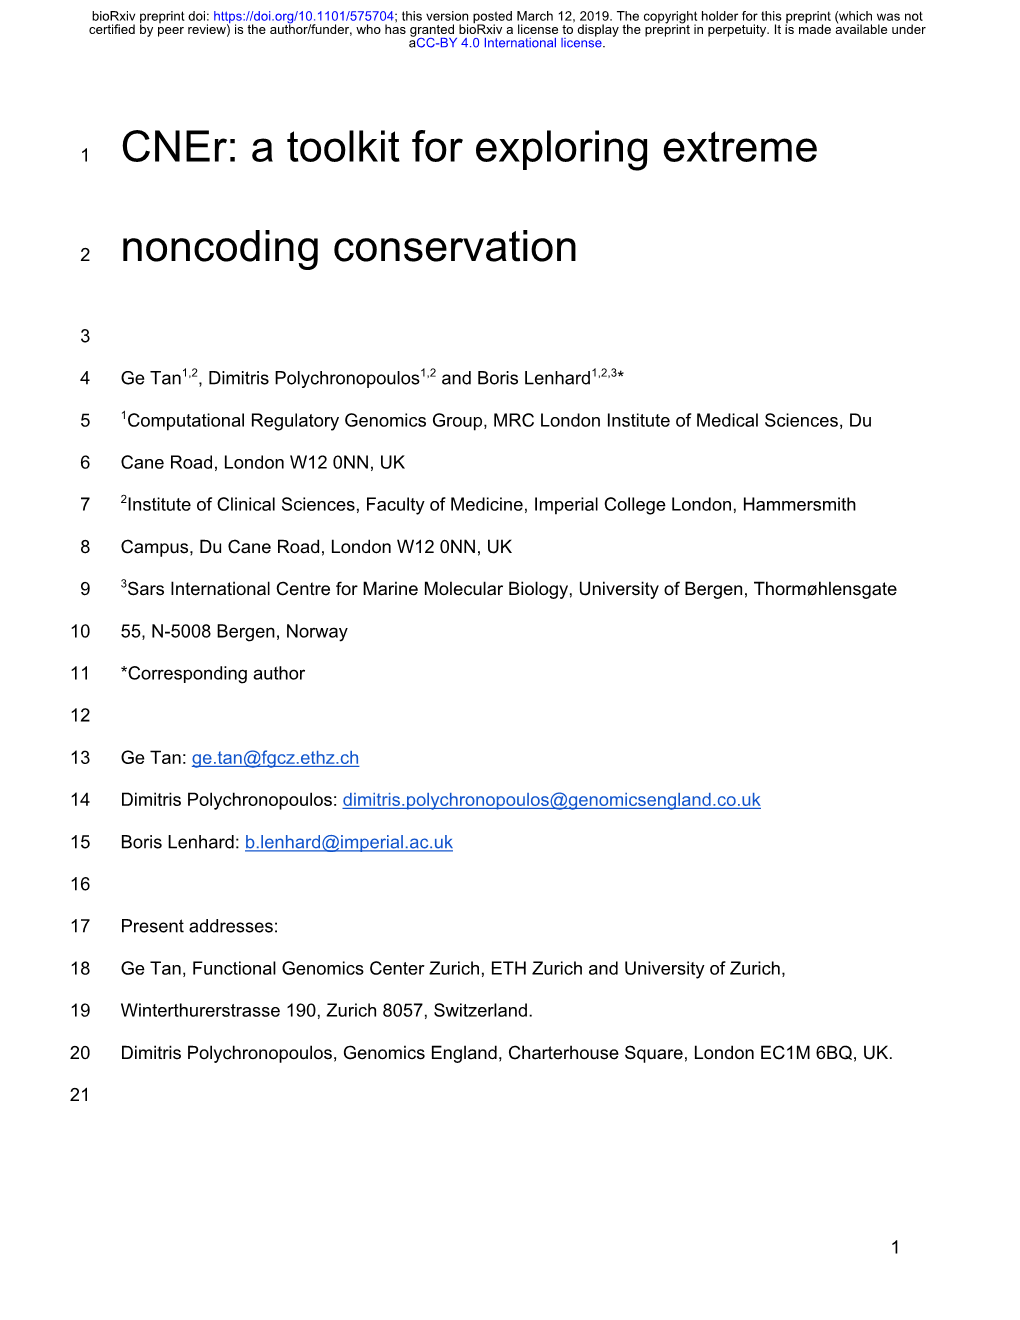 Cner: a Toolkit for Exploring Extreme Noncoding Conservation